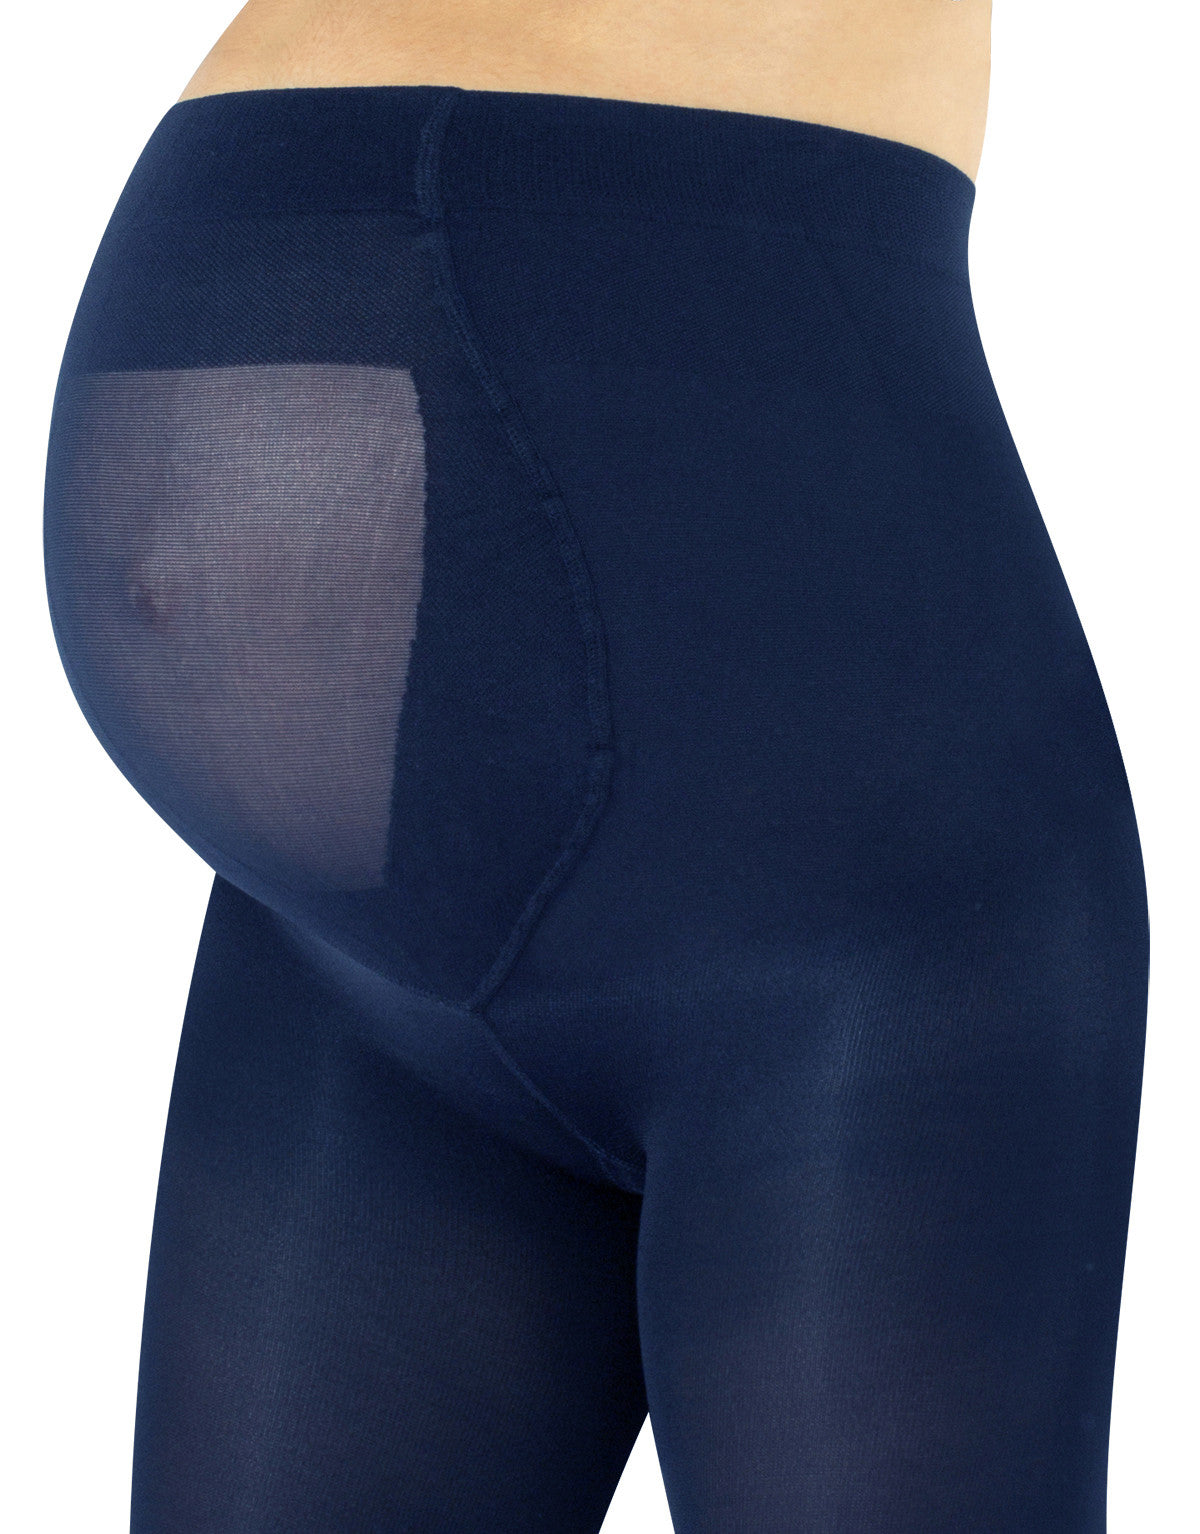 Calzitaly 100 Den Maternity Tights - Navy blue ultra opaque pregnancy tights with an extra panel and flat seam.